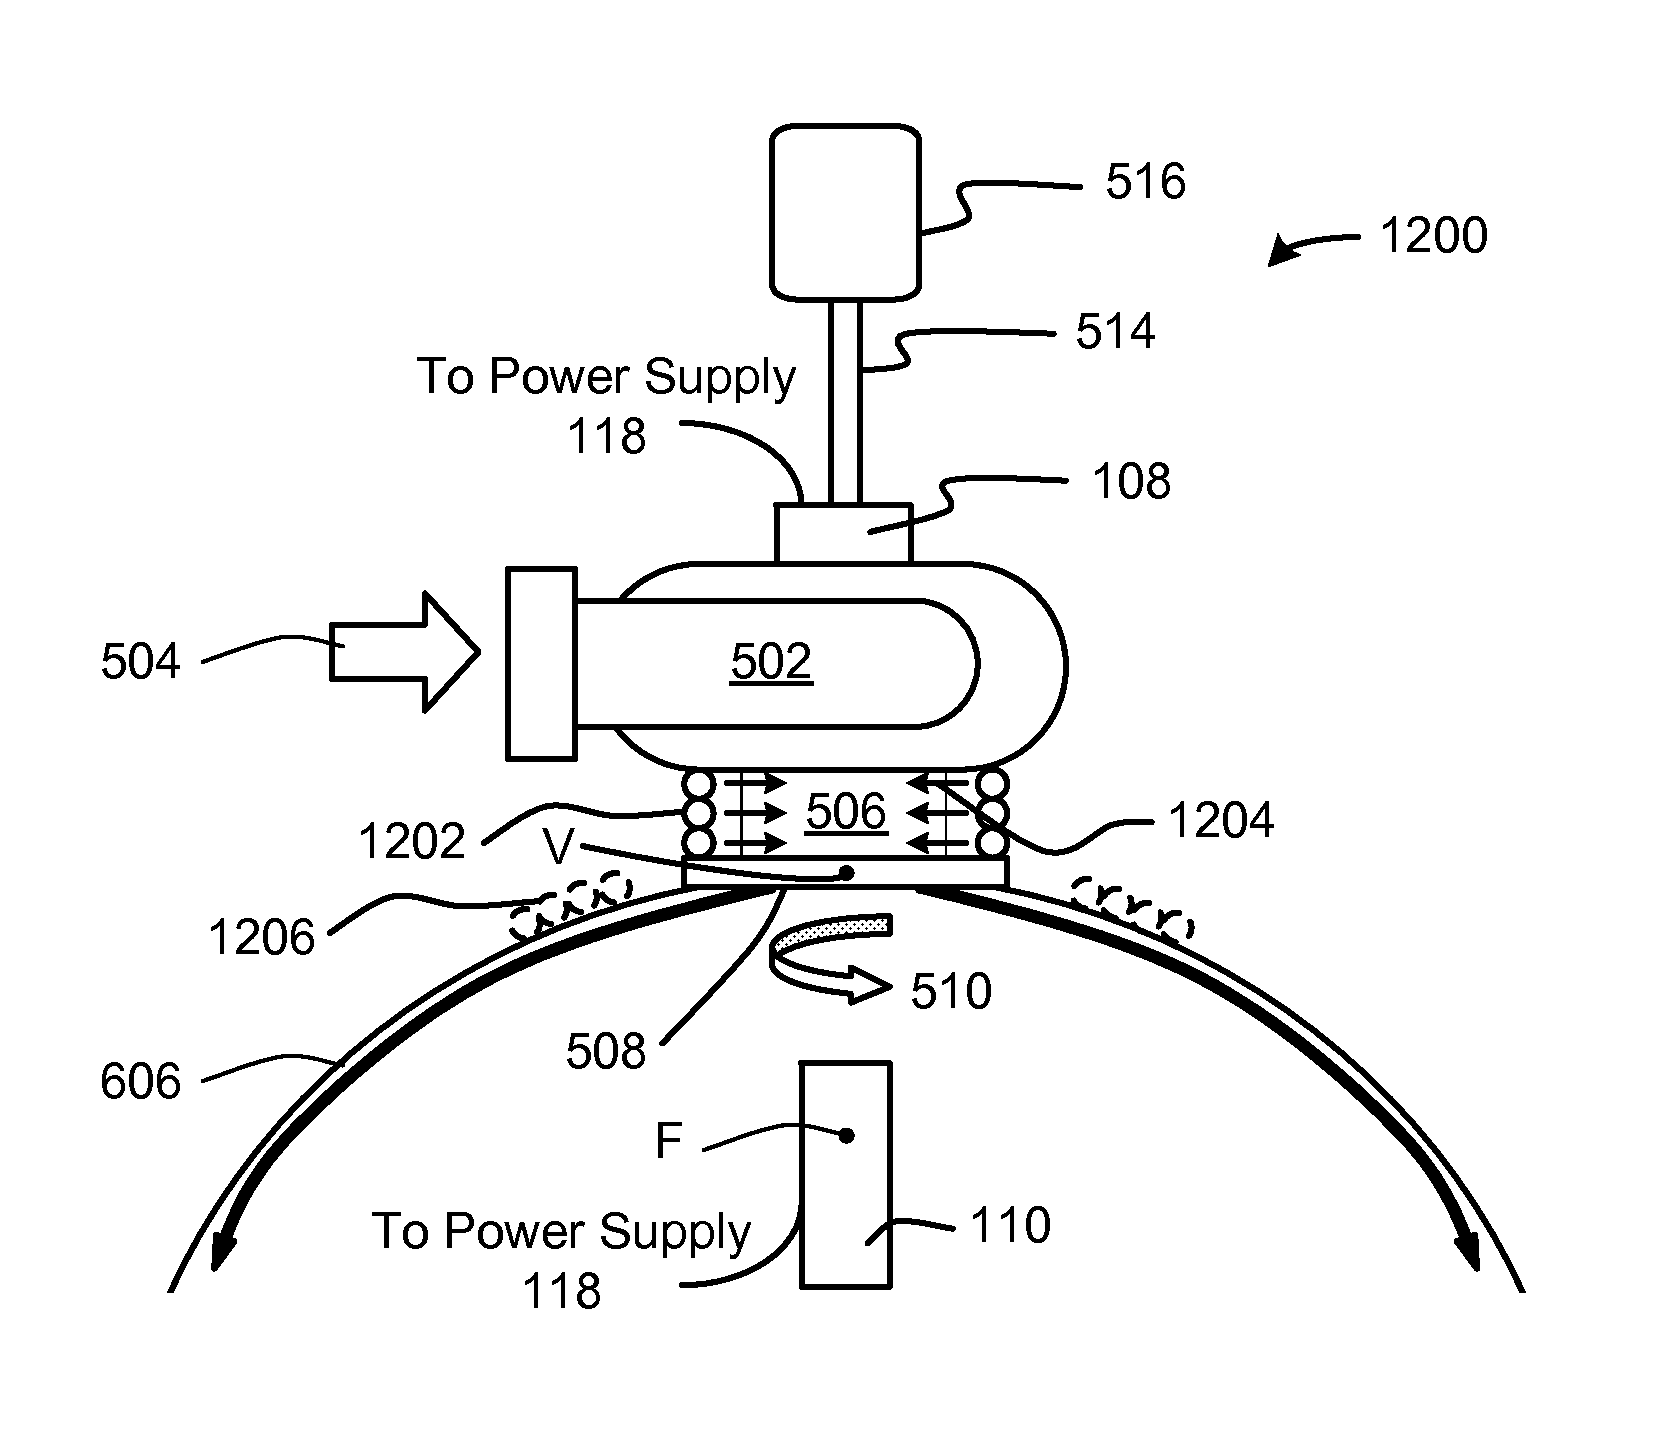 Method for treating a substance with wave energy from an electrical arc and a second source